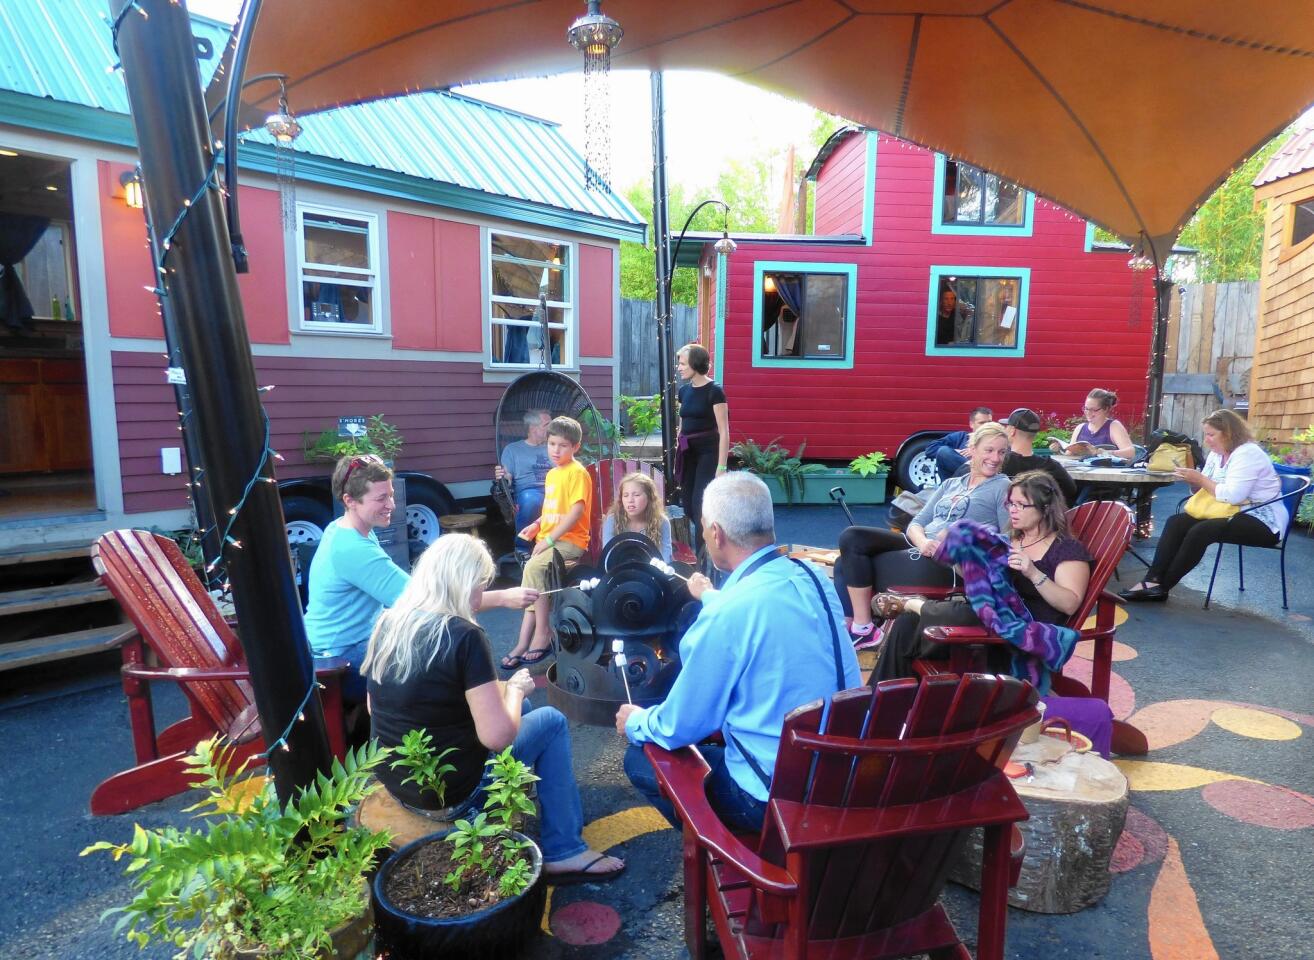 The courtyard at Caravan is a common area in the center of the six tiny homes and it’s where folks gather when there’s an open house.